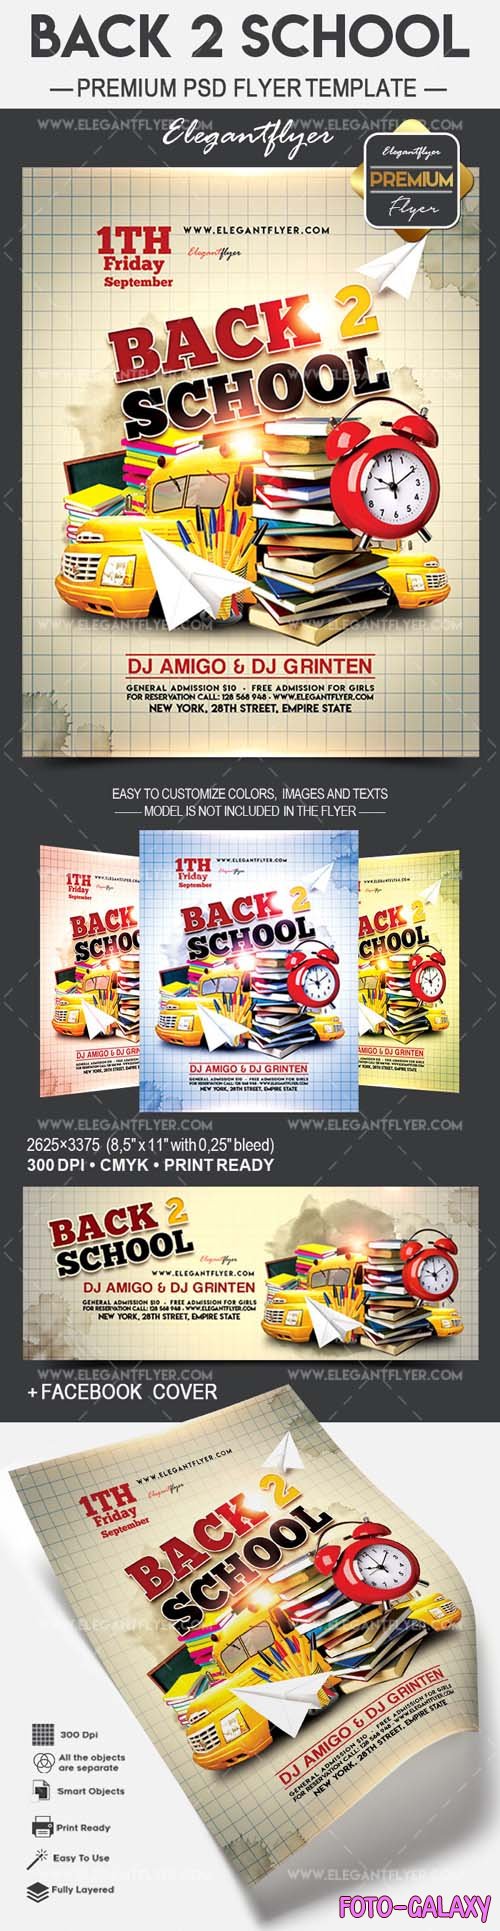 Flyer for Back to School